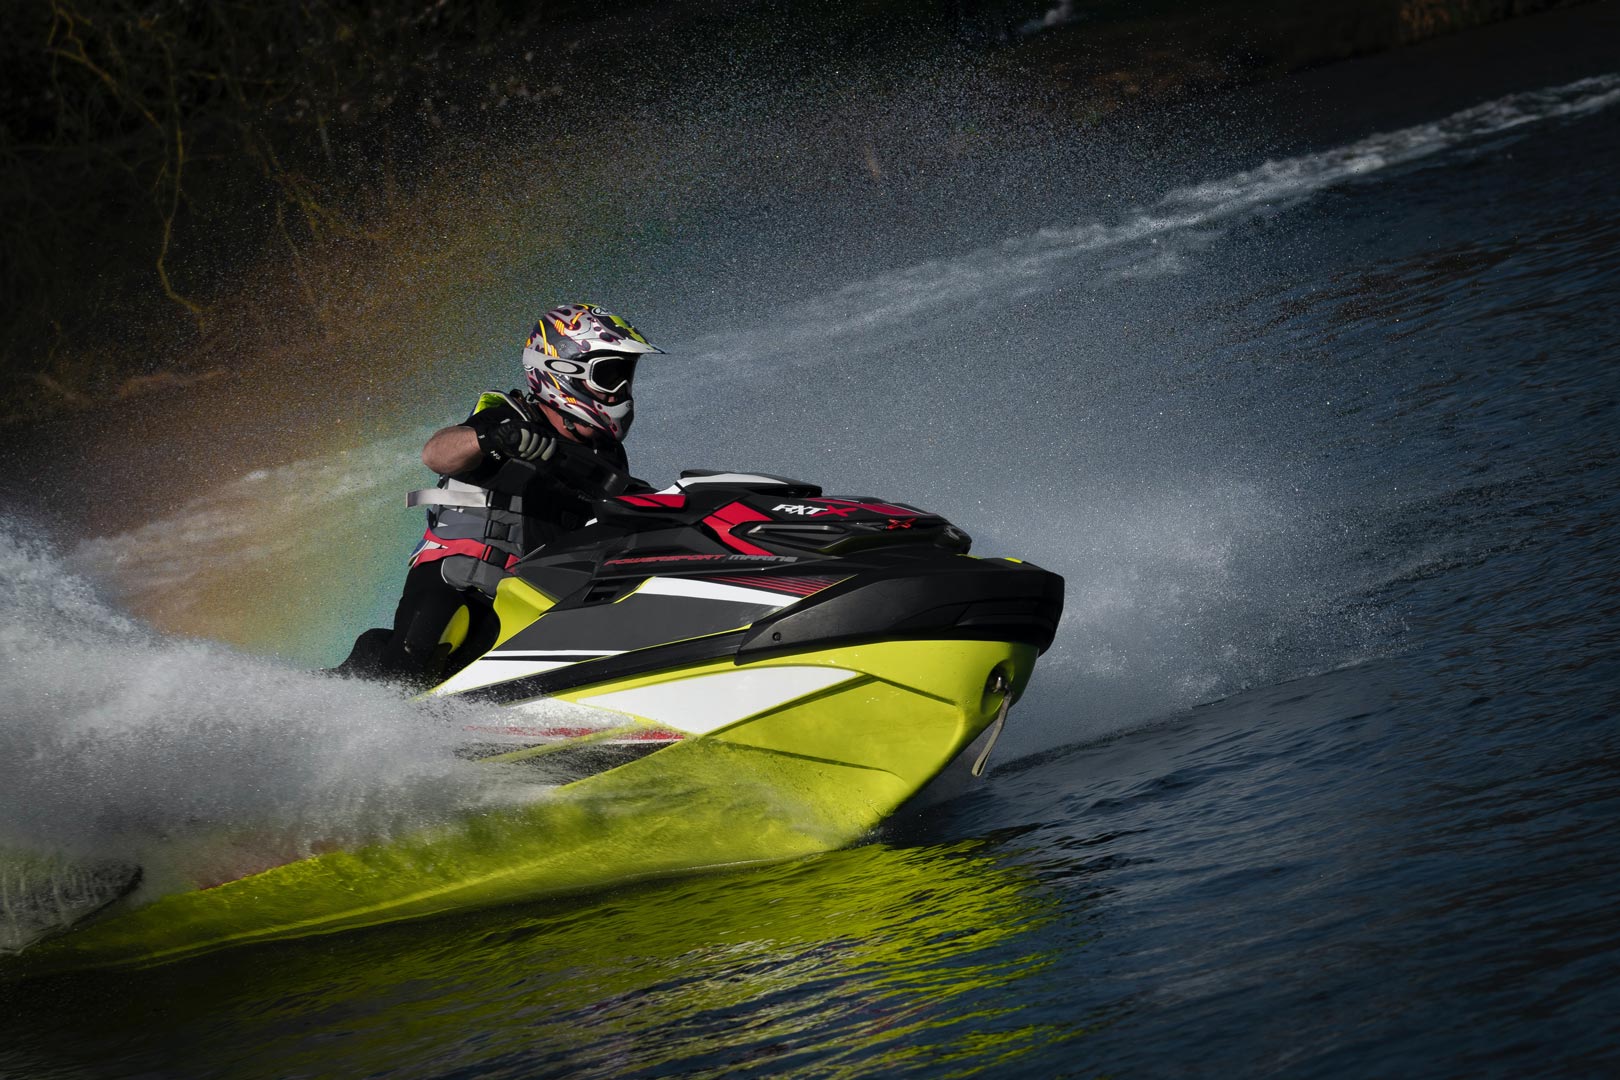 A Comprehensive Guide on How to Ride a Jet Ski